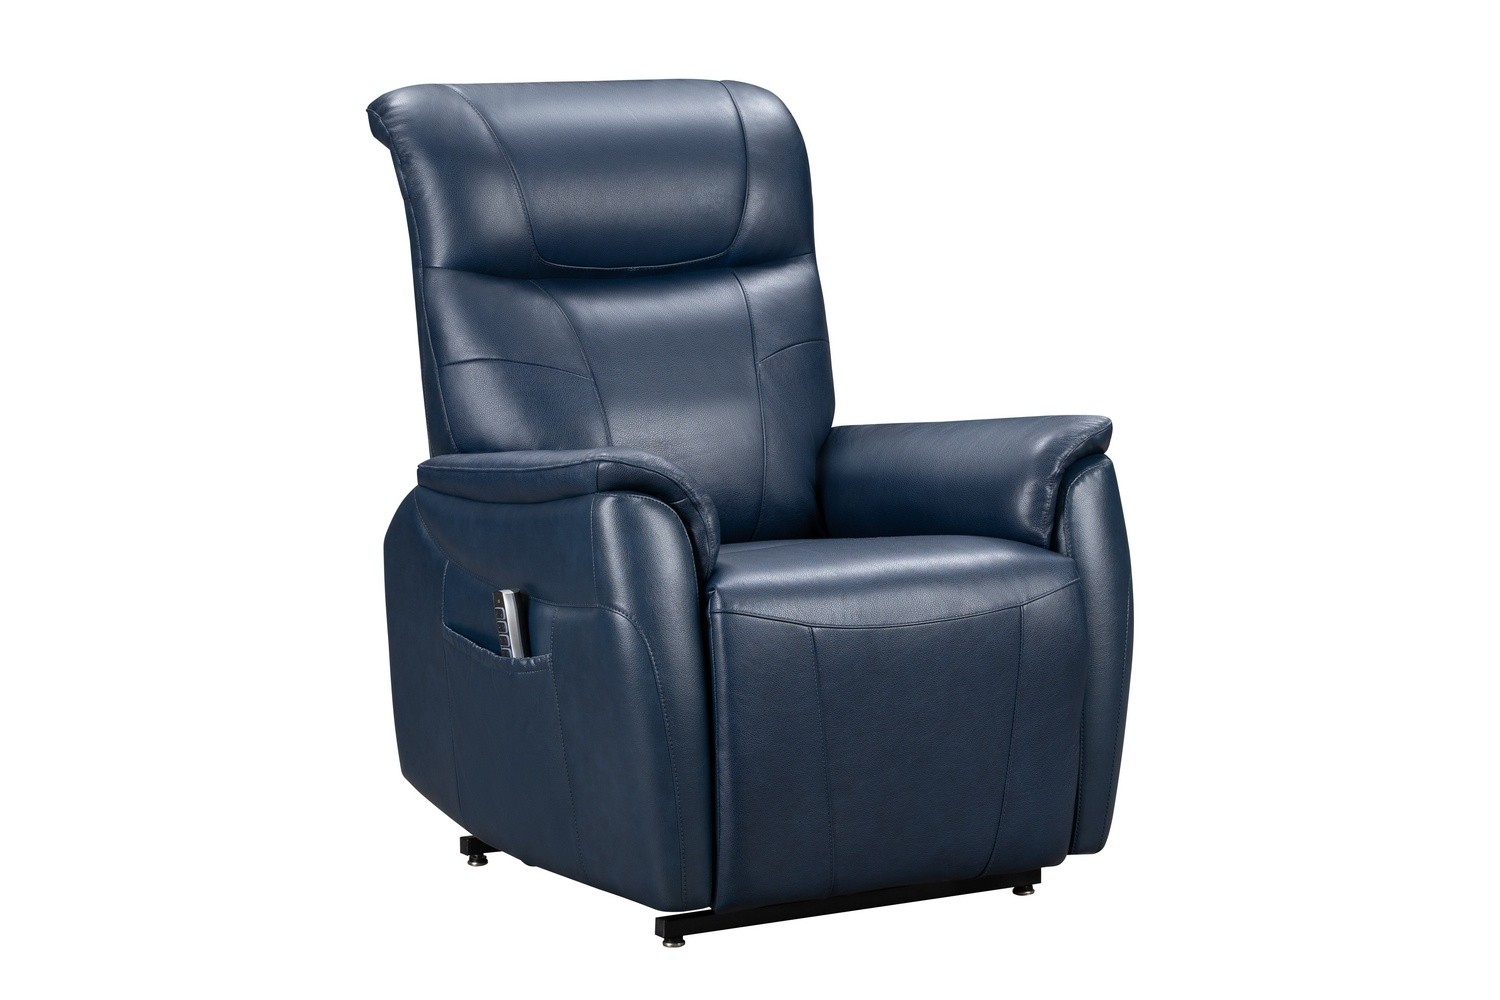 Barcalounger Leighton Lift Chair Recliner Chair with Power Head Rest, Power Lumbar and Lay Flat Mechanism - Marco Navy Blue/Leather Match